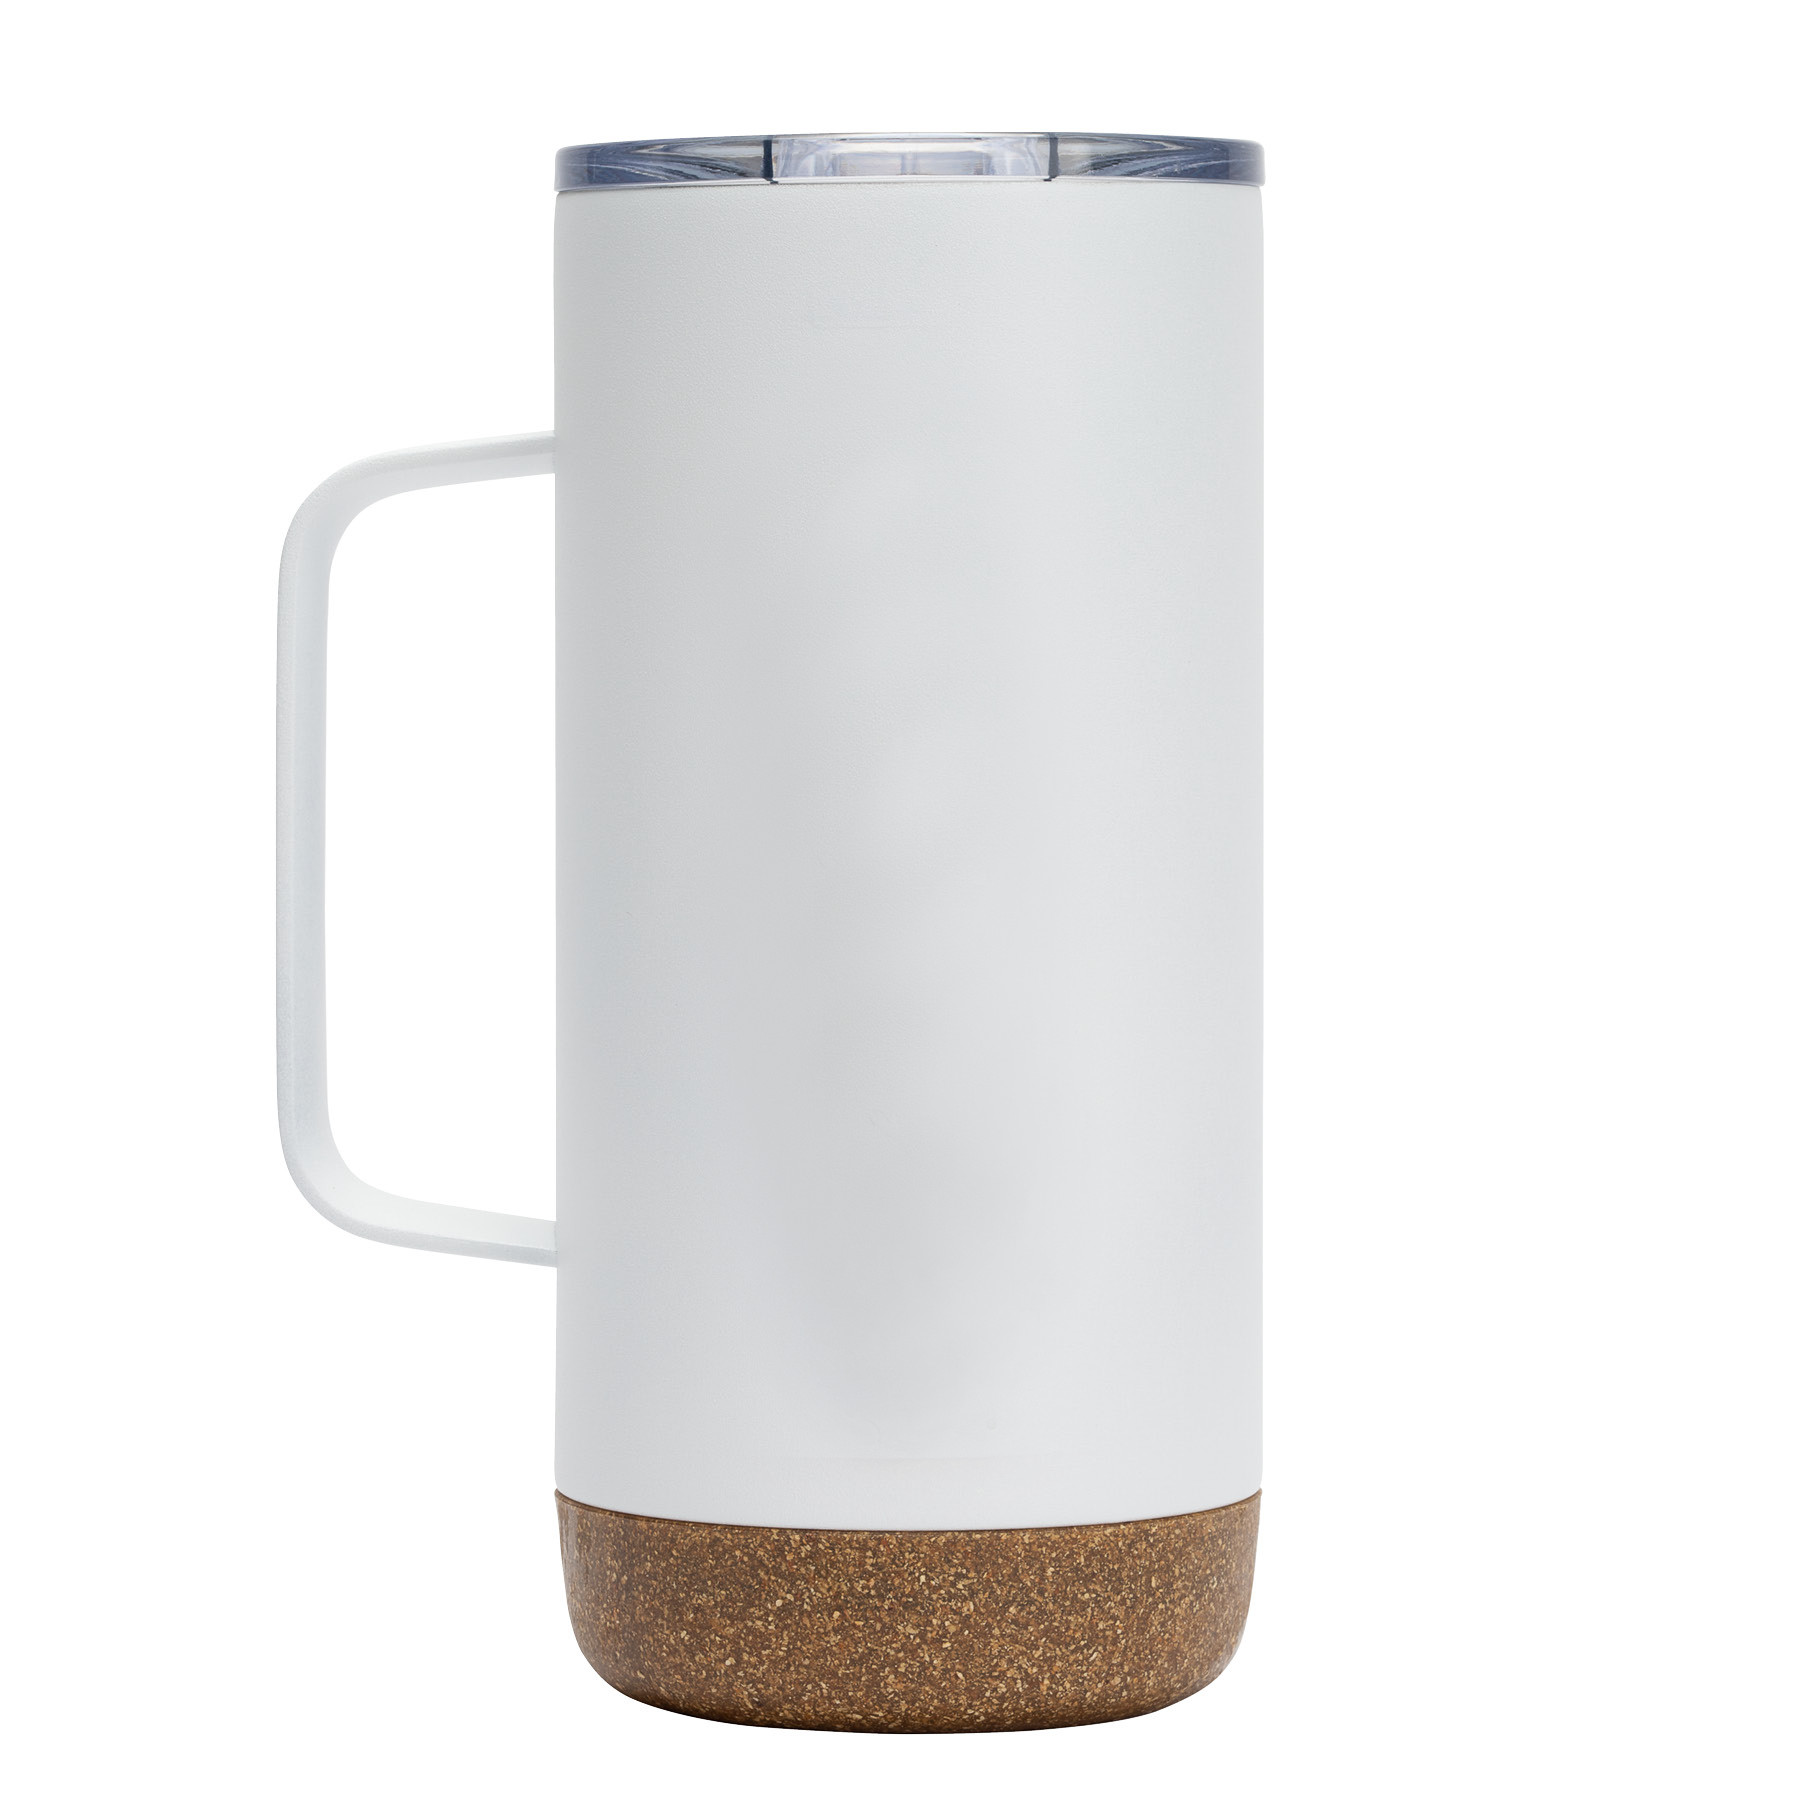 Insulated Stainless Steel Coffee Mug with Handle Vacuum Sealed